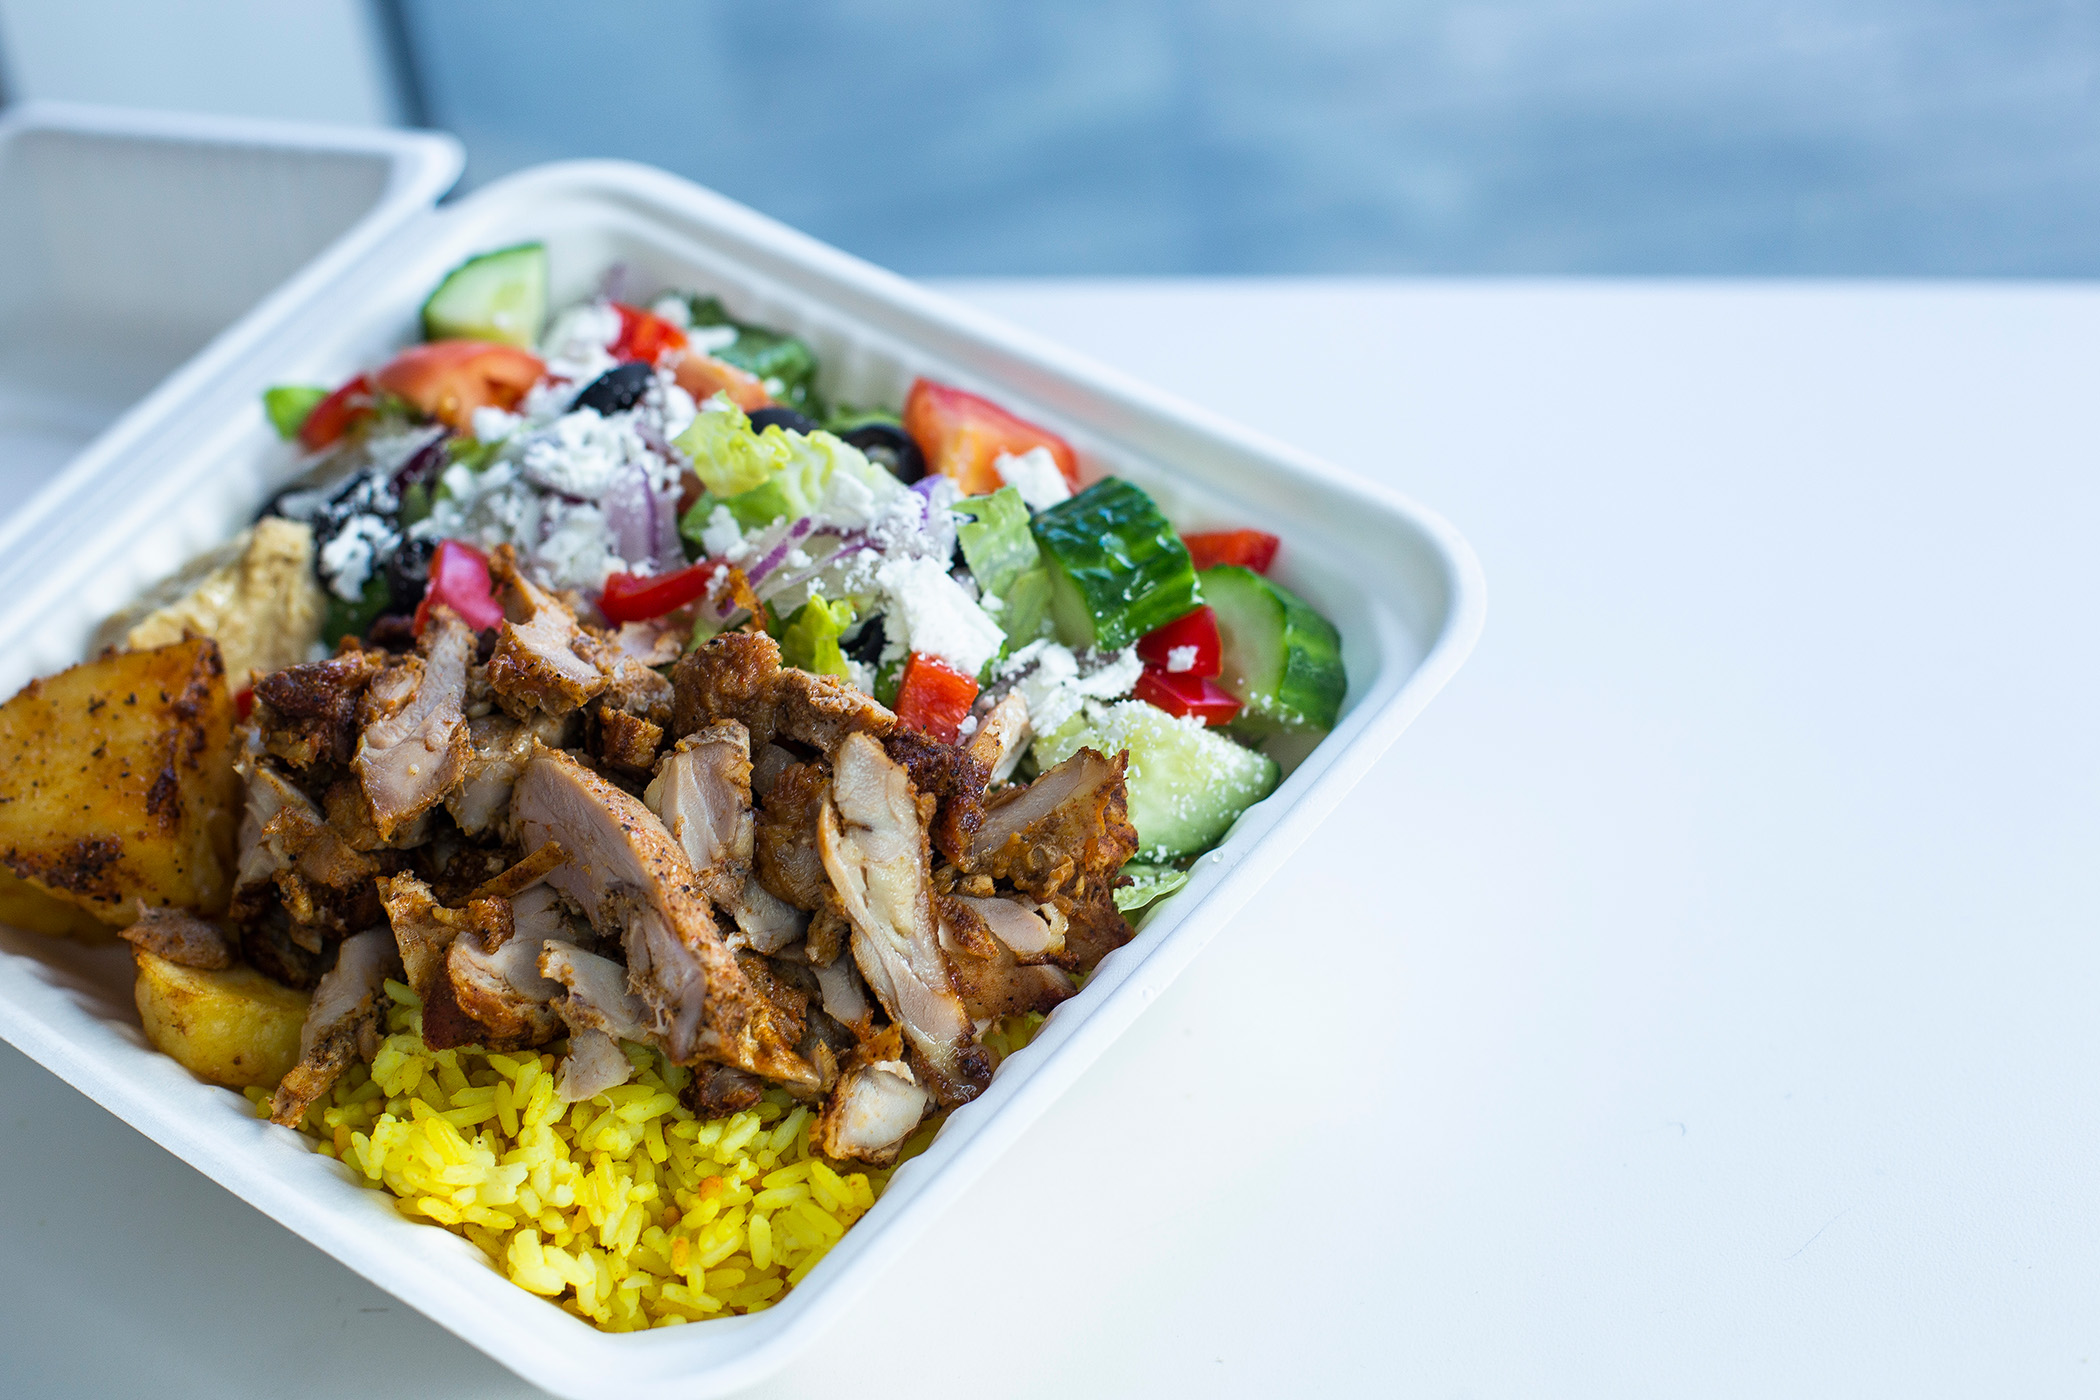 Chicken, rice and salad container